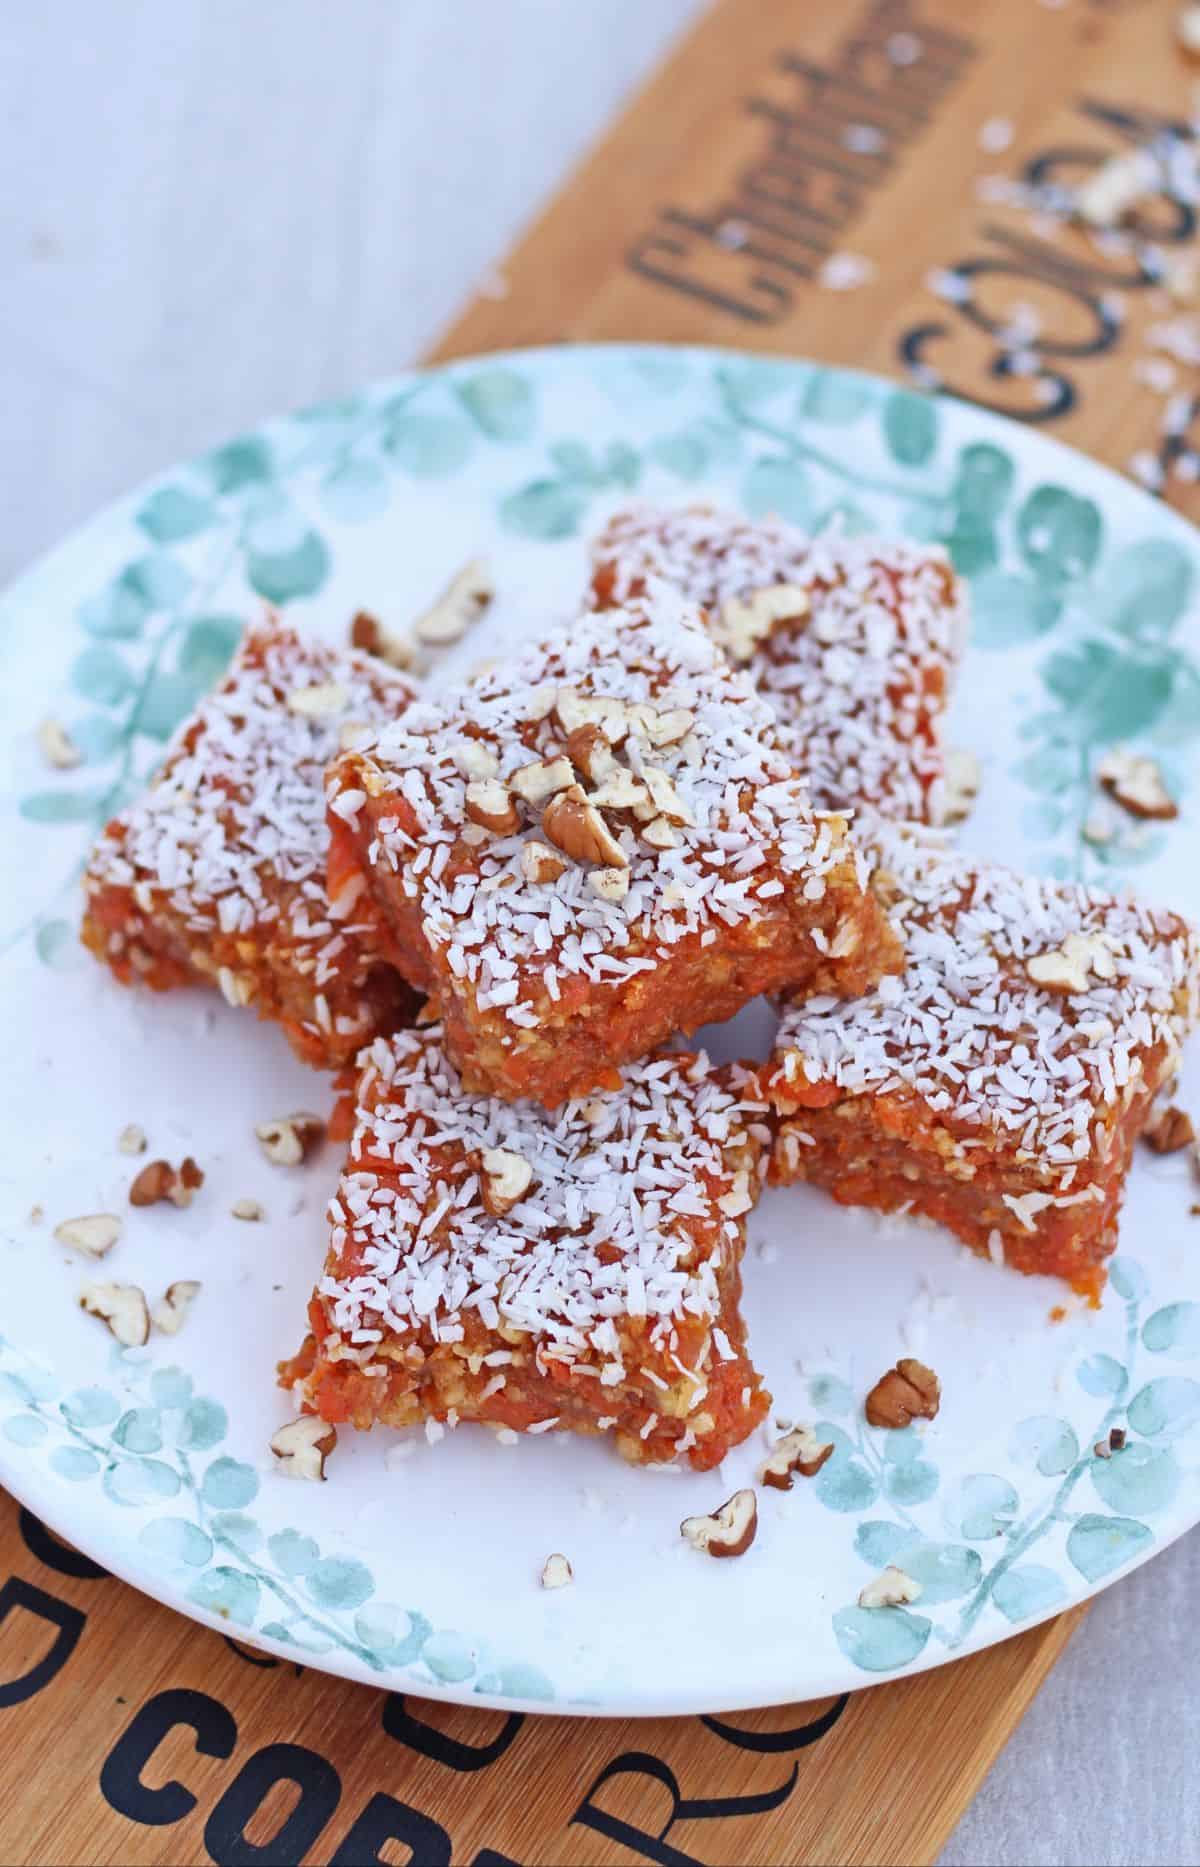 carrot and nuts dessert sprinkled with coconut